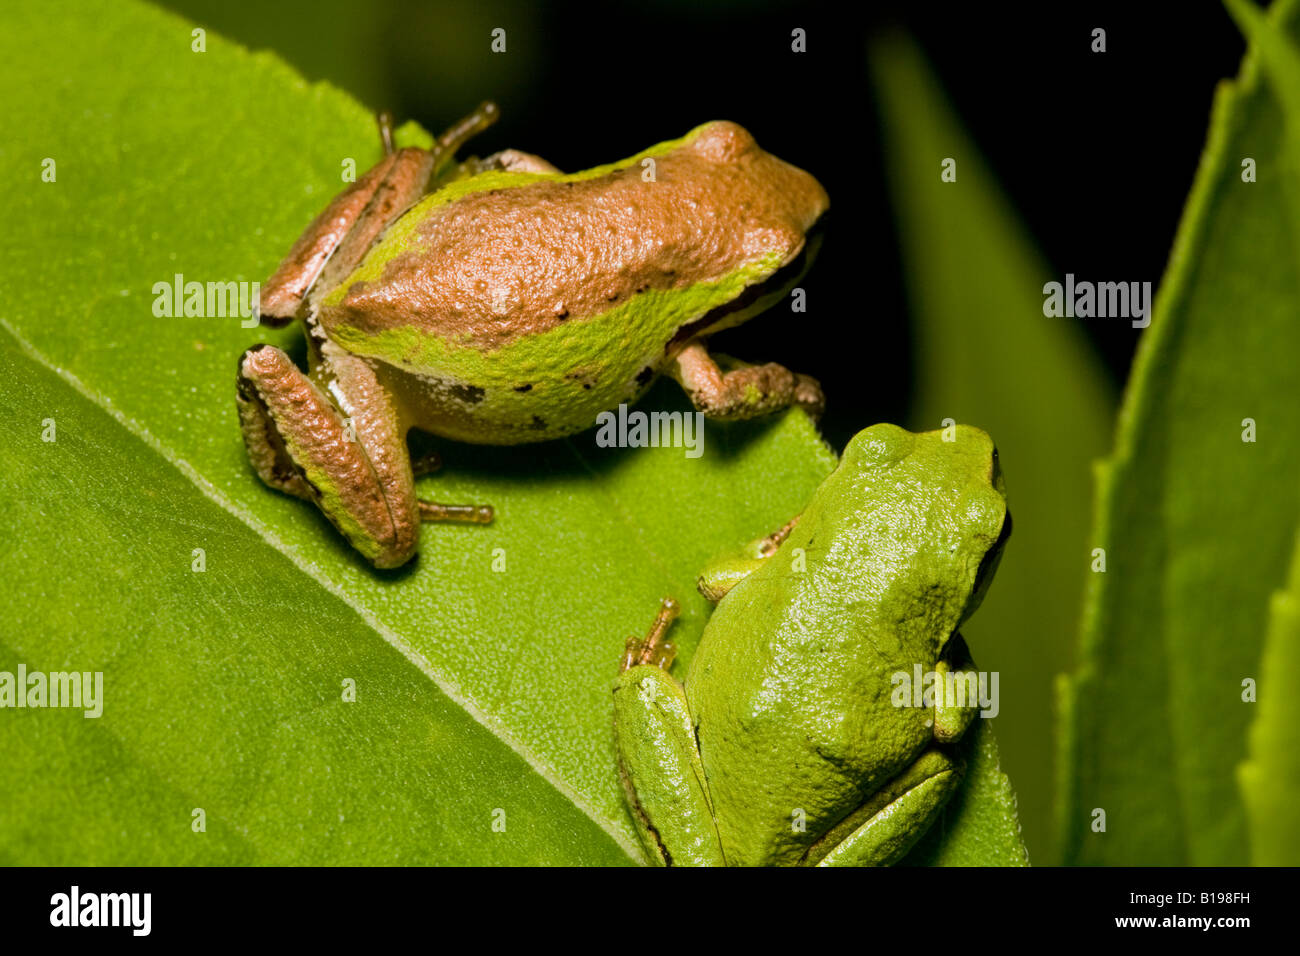 The Pacific Treefrog Hyla Regilla is quite common in B.C. They are